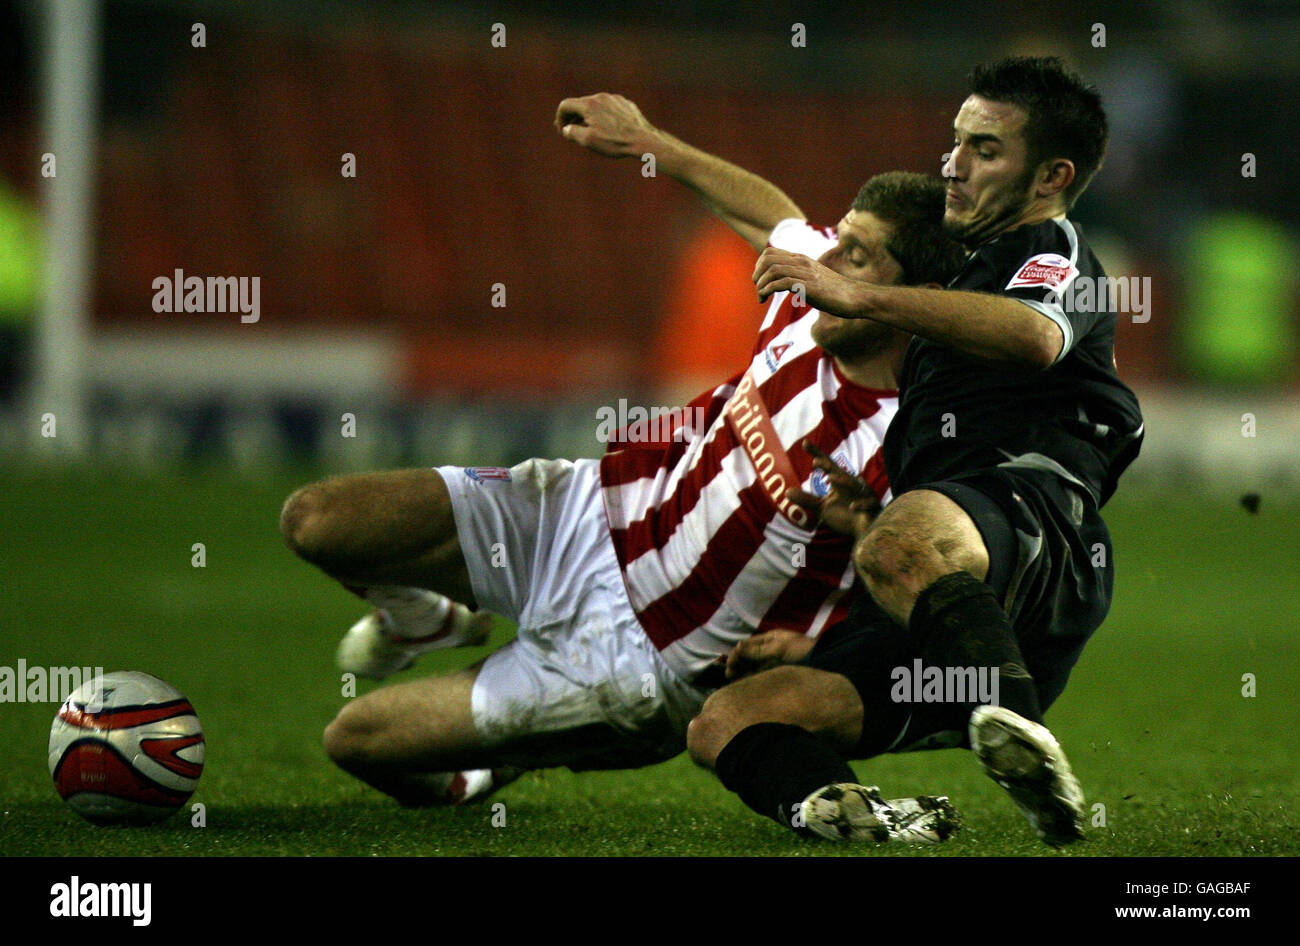 Stoke City's Richard Cresswell and West Bromwich Albion's Carl Hoefkens tussle during the Coca-Cola Football League Championship match at the Britannia Stadium, Stoke-on-Trent. Stock Photo